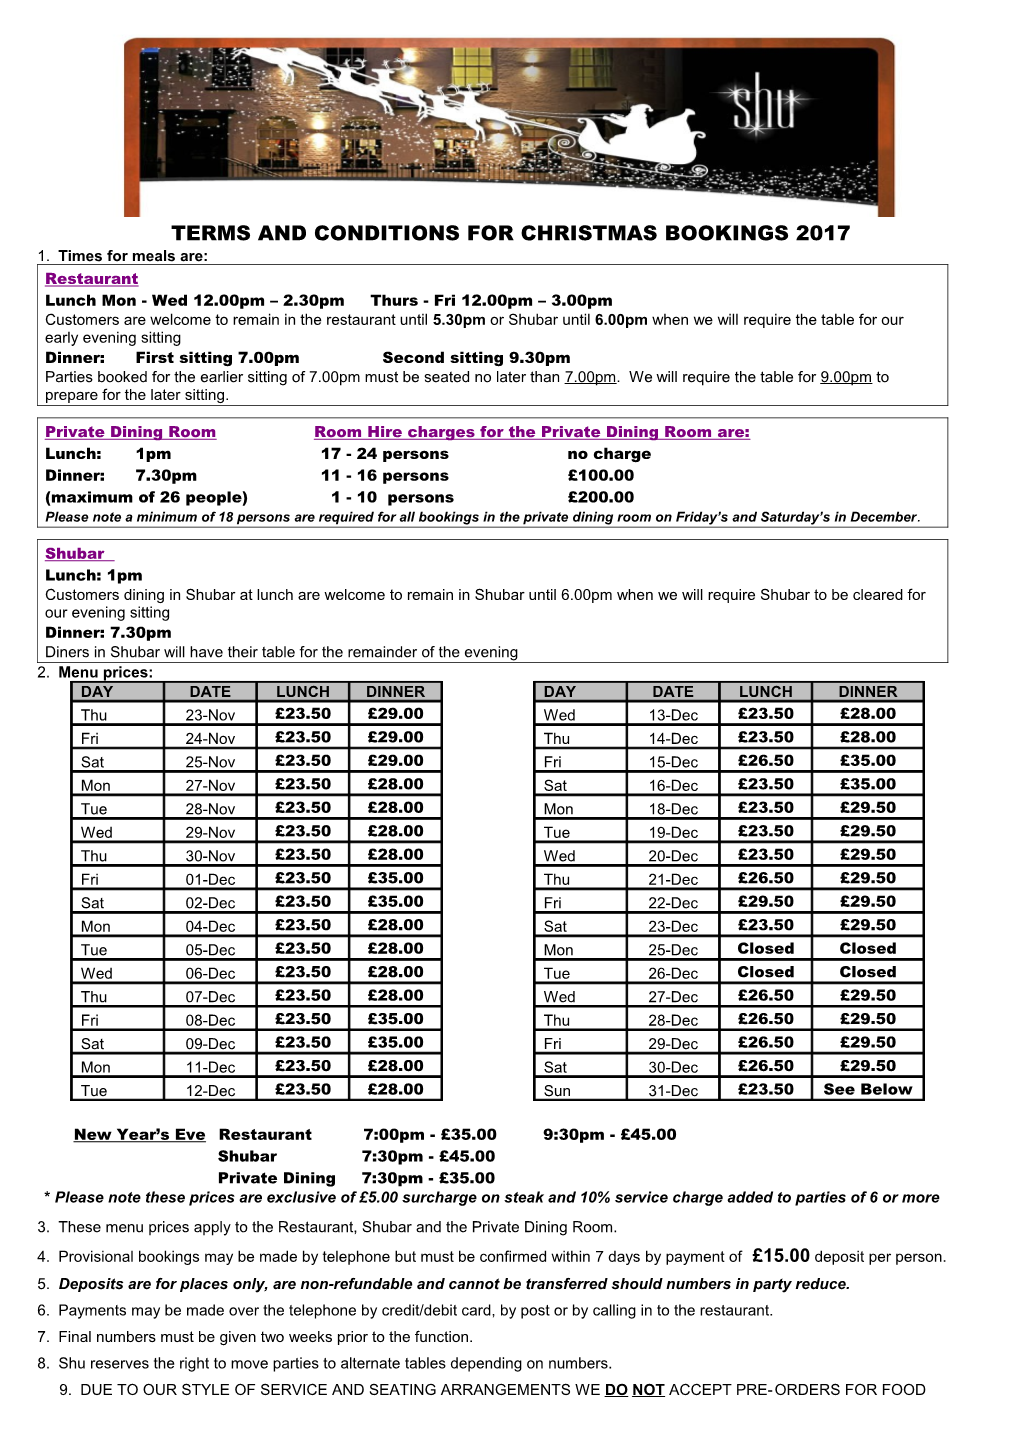 Terms and Conditions for Christmas Bookings 2017